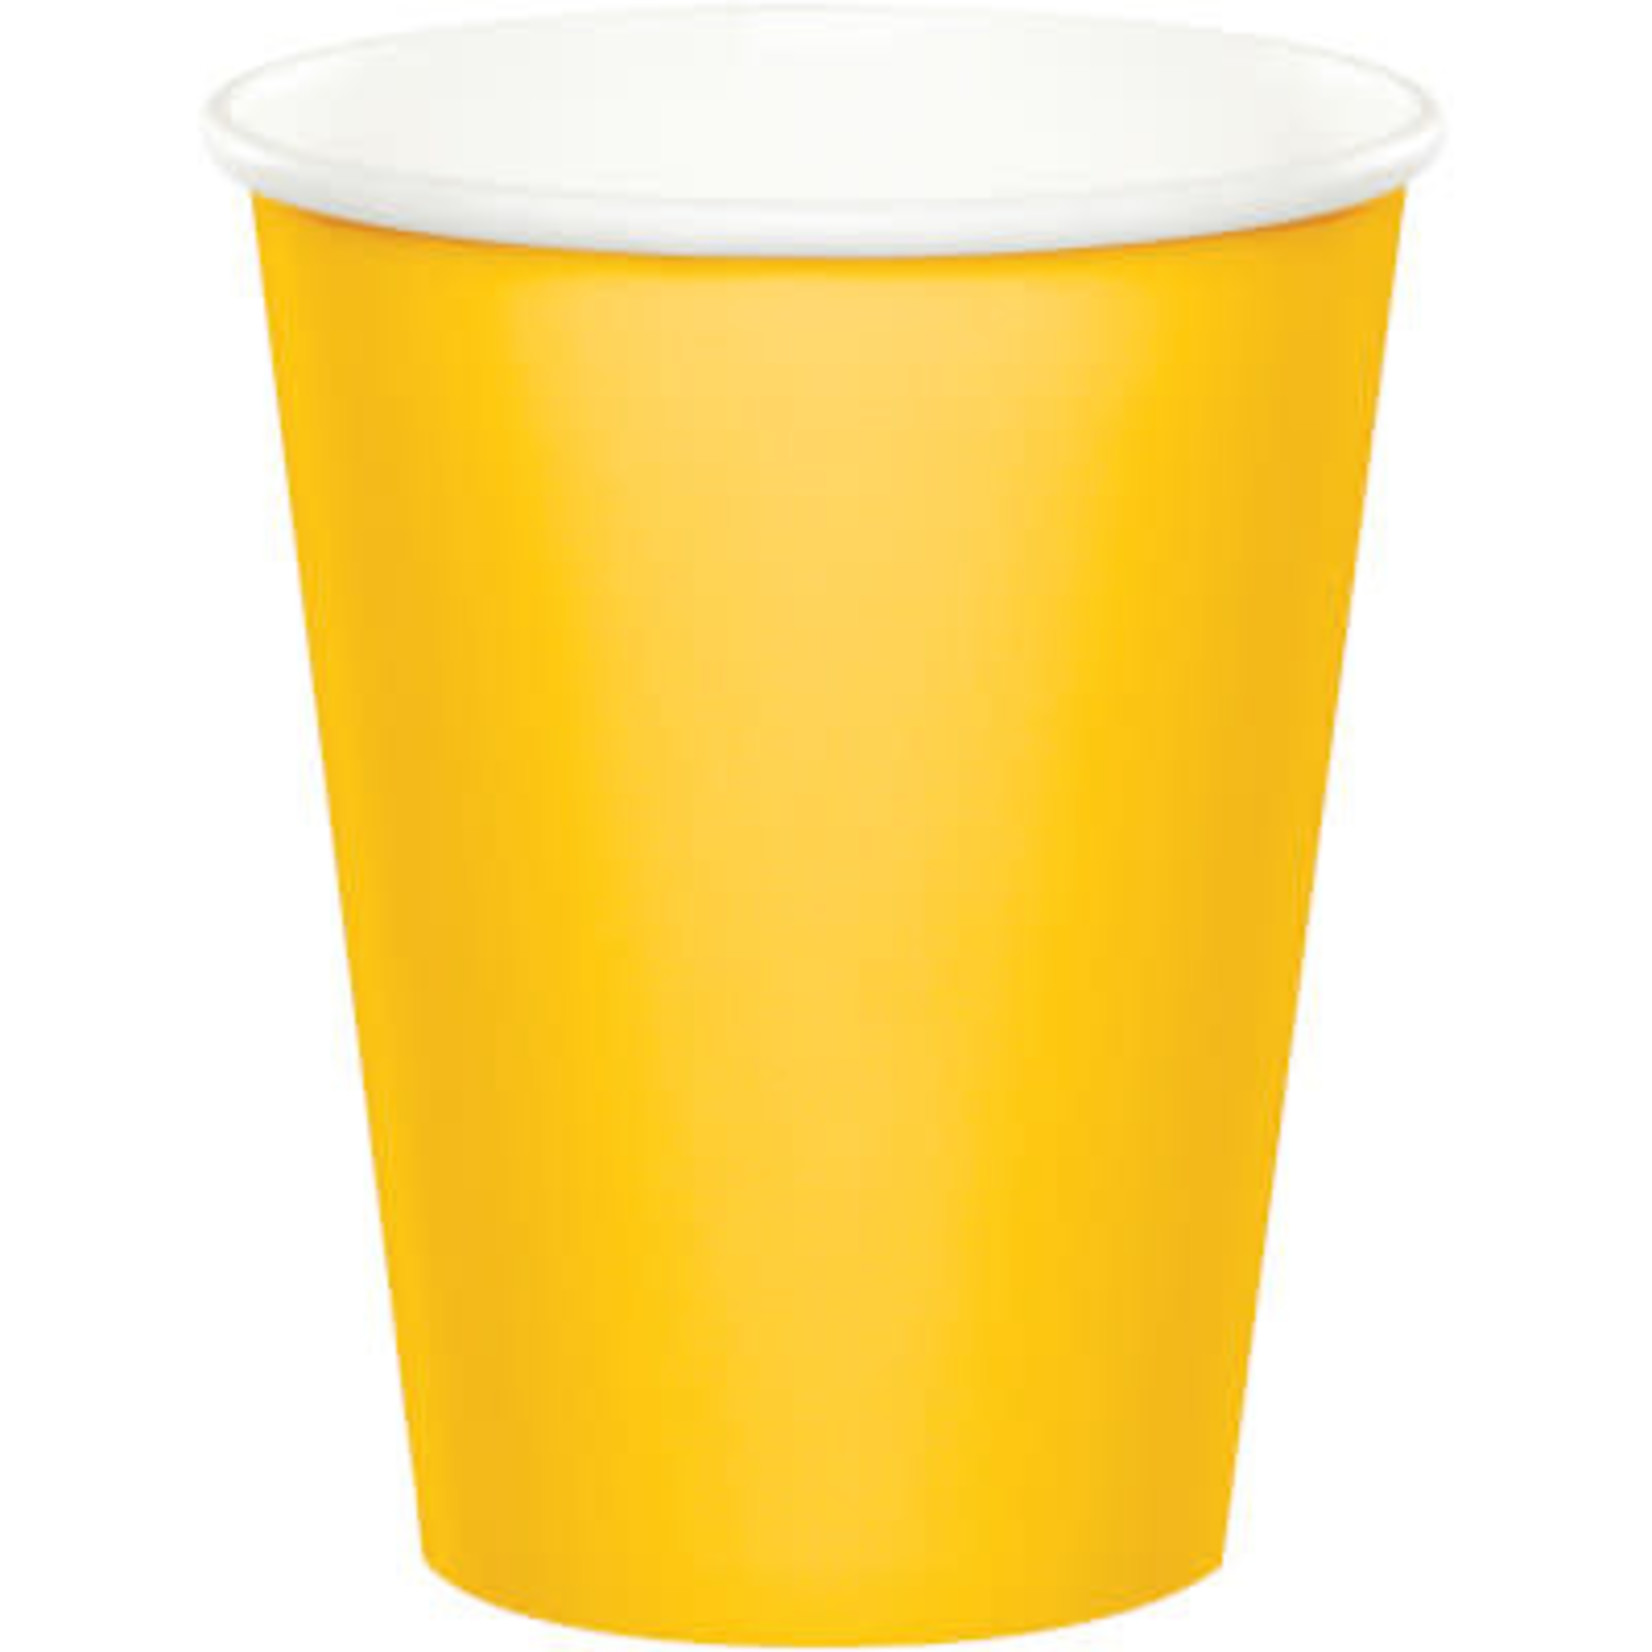 Touch of Color 9oz. School Bus Yellow Hot/Cold Paper Cups - 24ct.